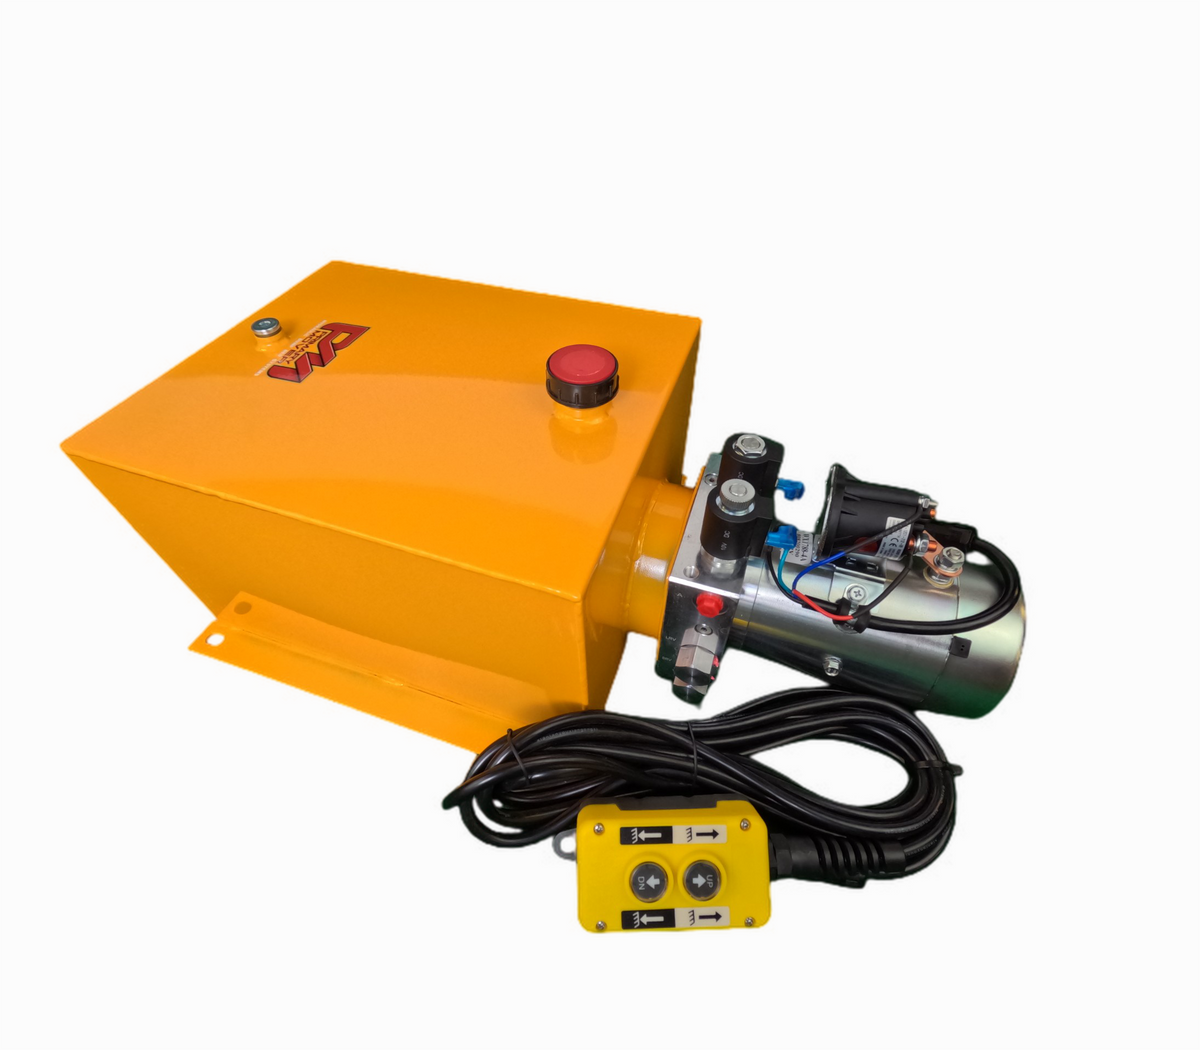 DLH 12V Double-Acting Hydraulic Pump - Steel Reservoir, dual-acting hydraulic pump with red button and yellow metal box, optimized for dump bed trailers and trucks.